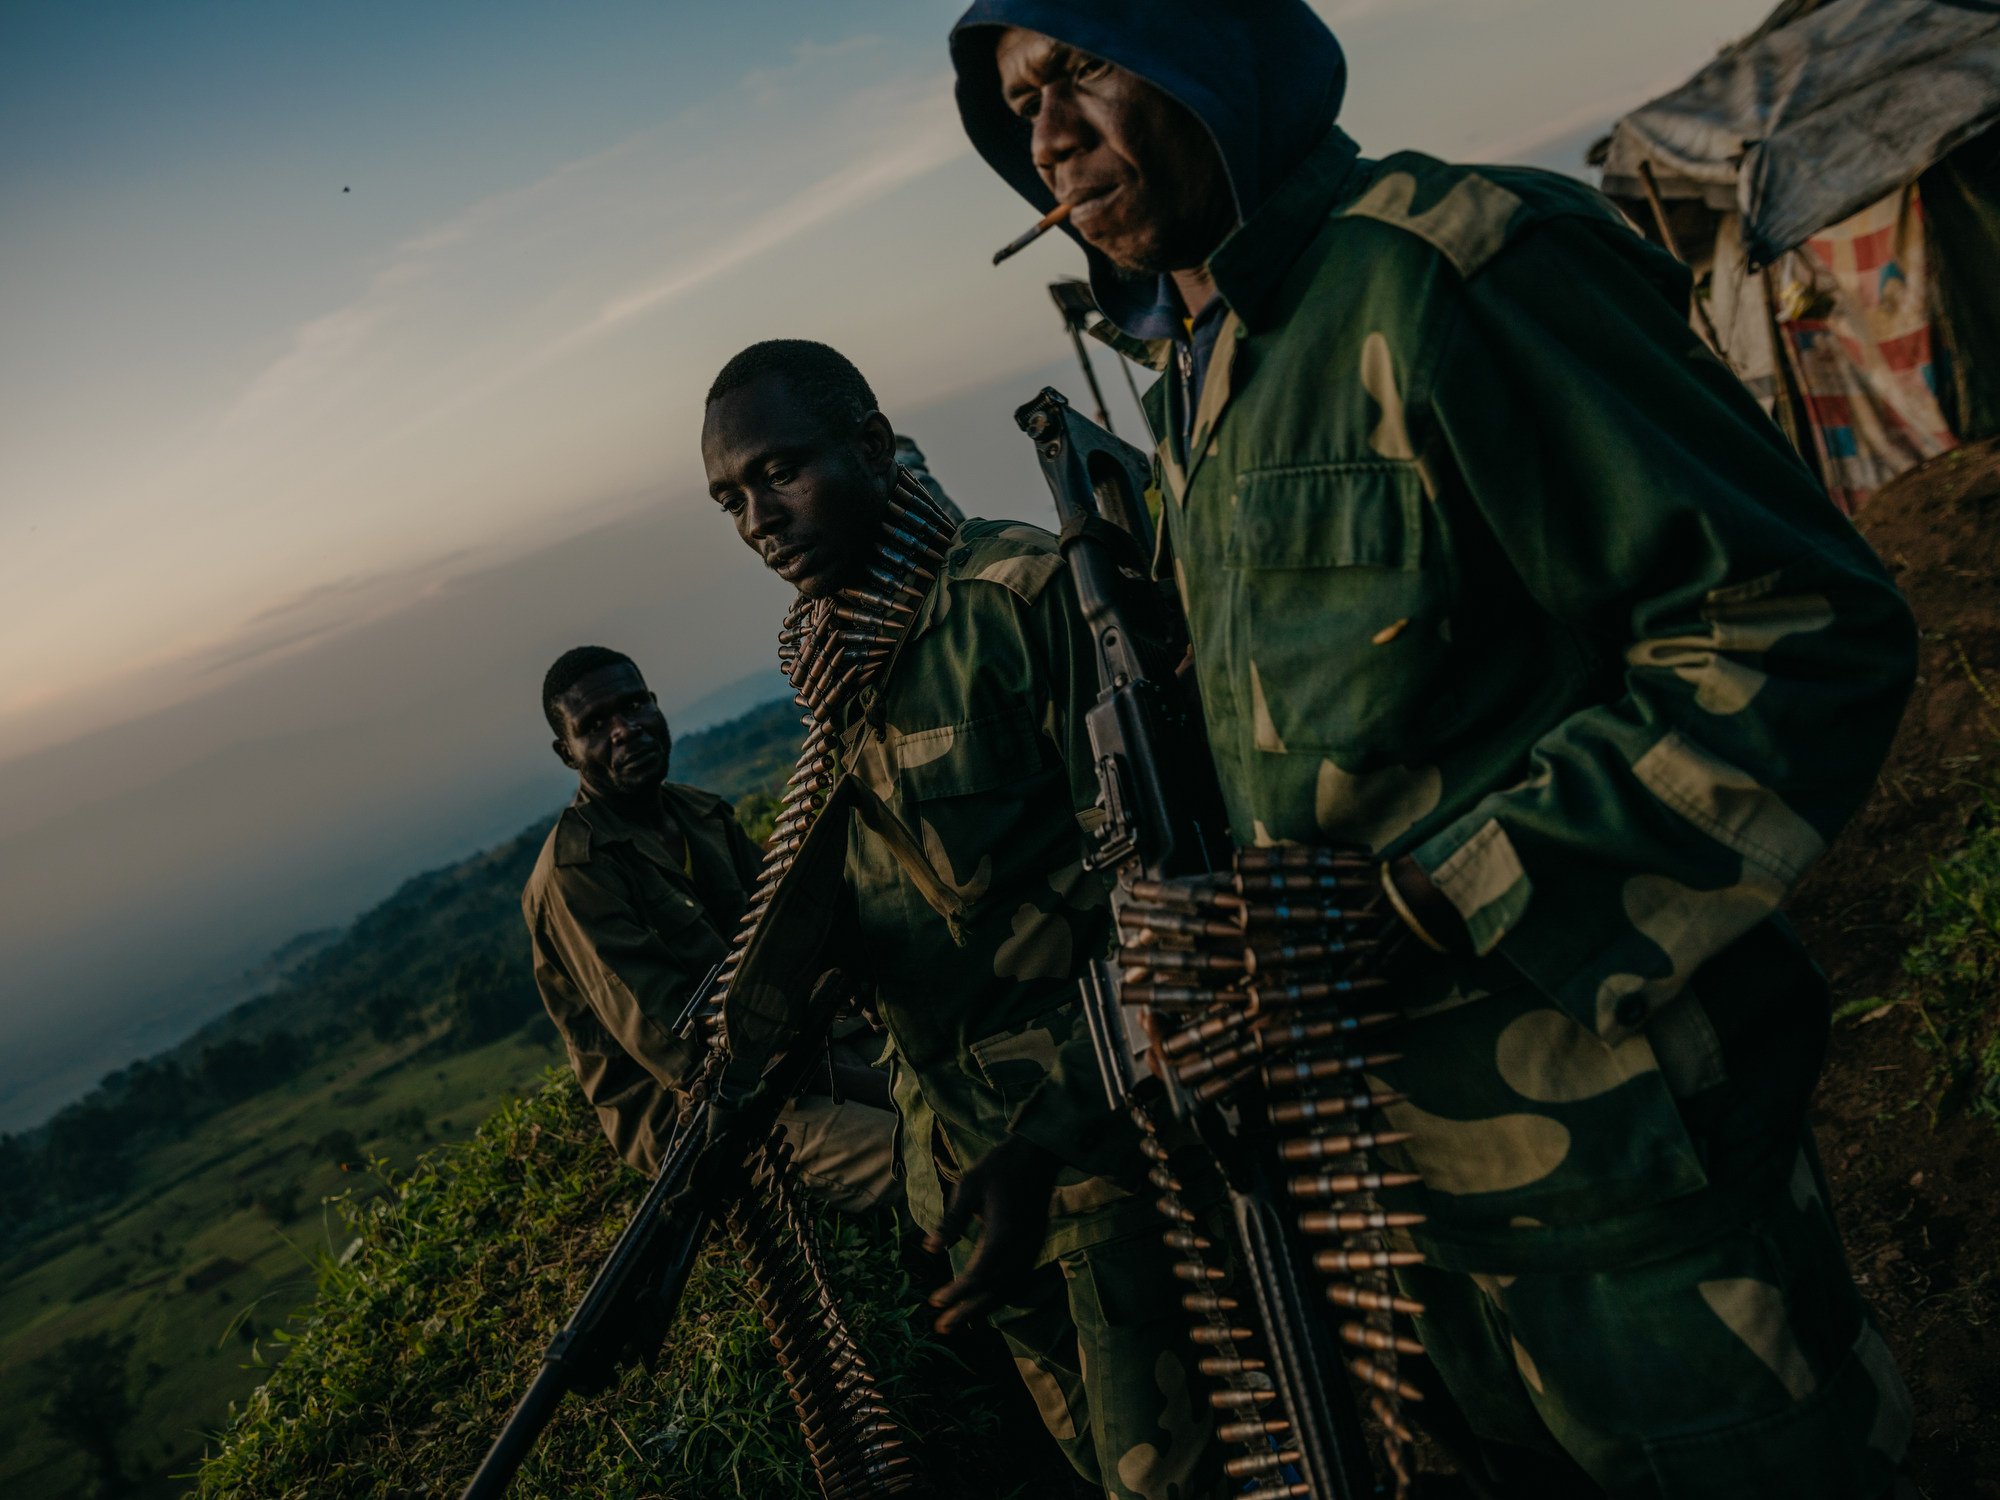  Congolese Army units at the Rutshuru frontline with the M23 rebel group. 